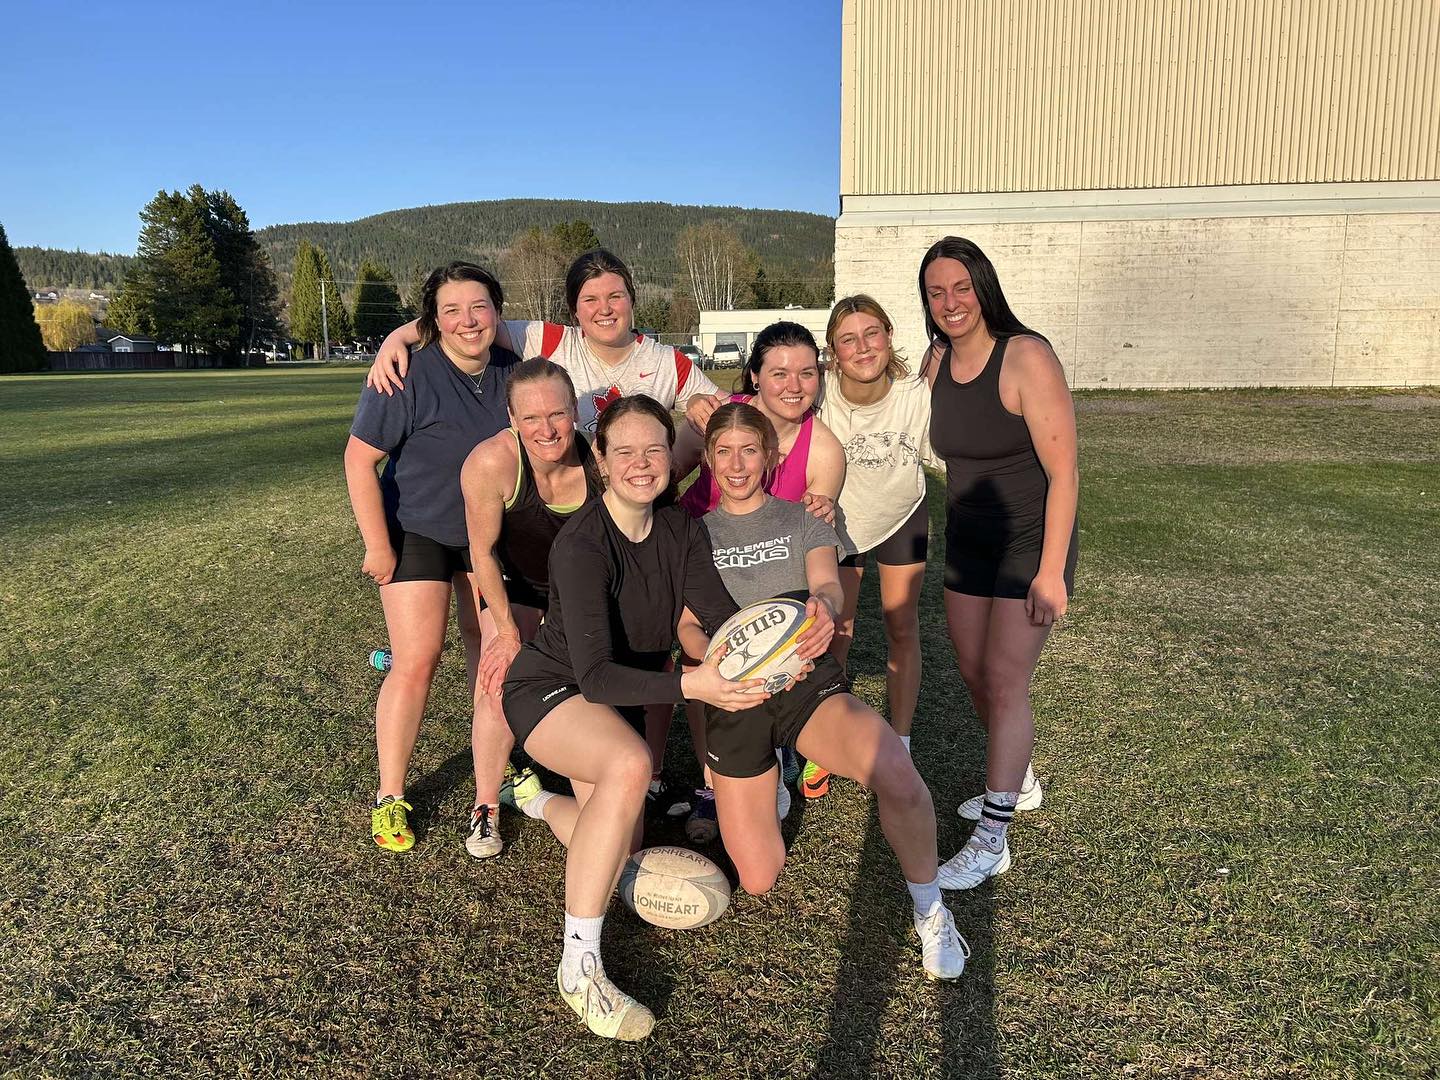 Terrace Women's Rugby team poses for a photo